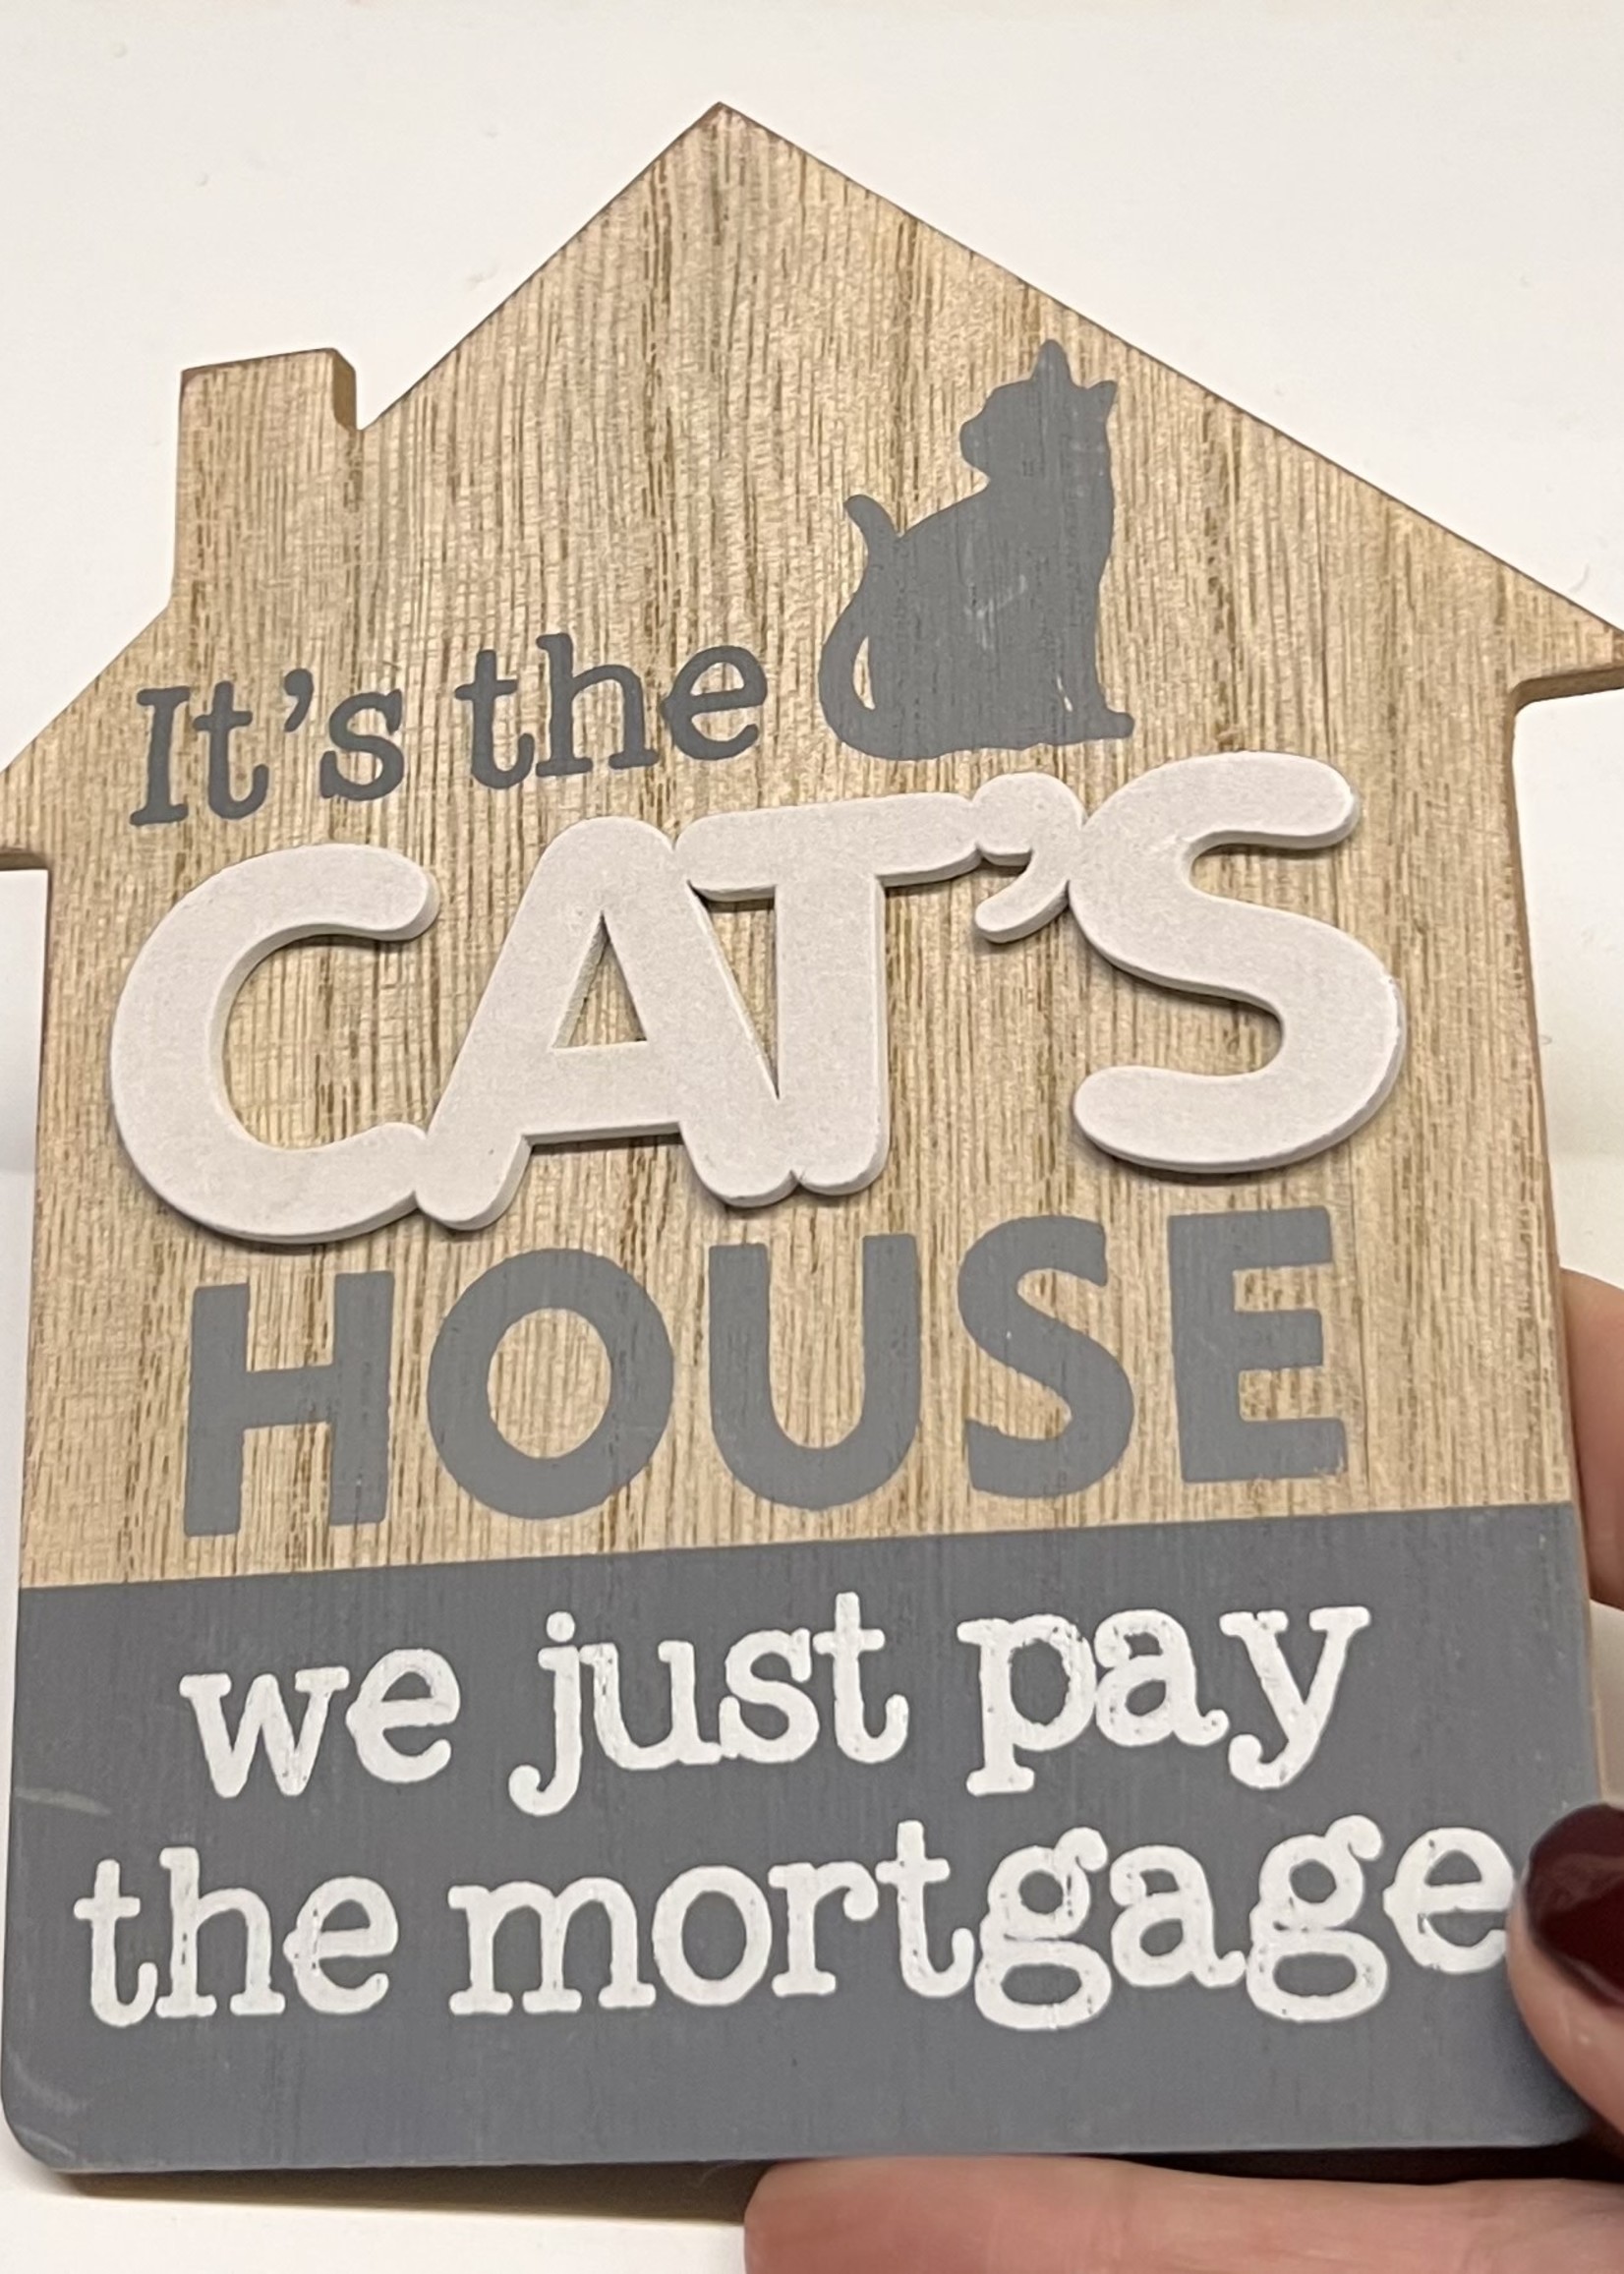 It’s the Cat’s House we just pay the mortgage  - sign